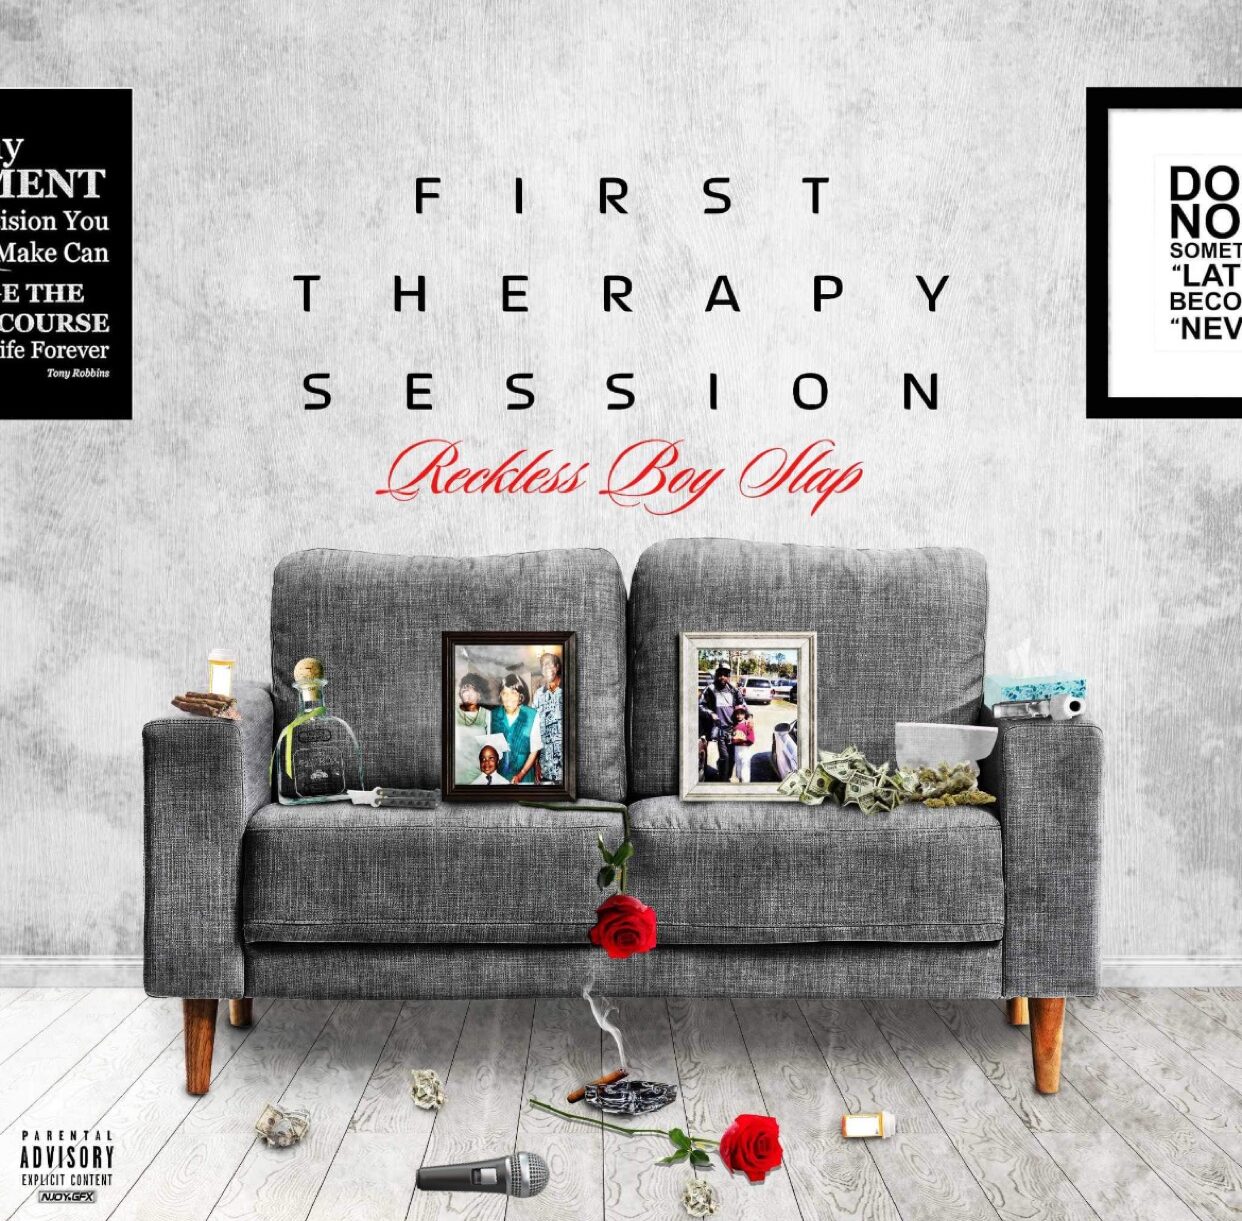 Reckless Boy Slap Set to Release Highly Anticipated Solo Album "First Therapy Session" on January 20th, 2024